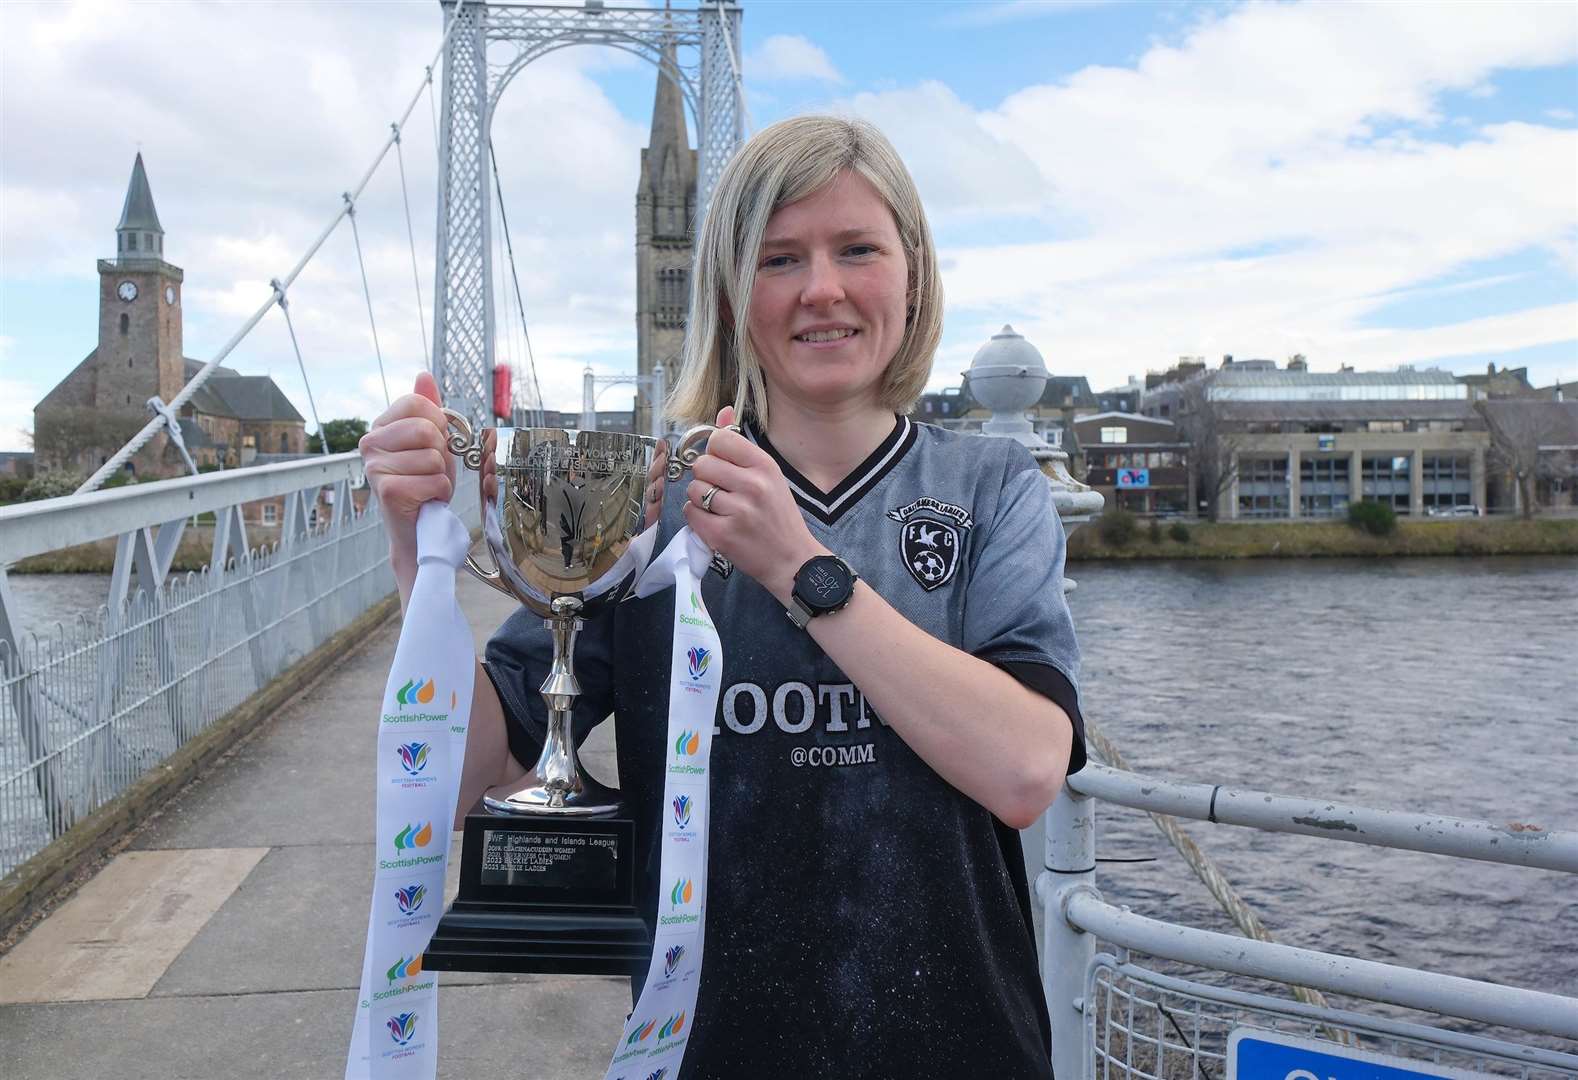 Caithness player Carly Erridge with the Highlands and Islands League trophy at the season's launch event in Inverness. Picture: Aimee Todd / Sportpix